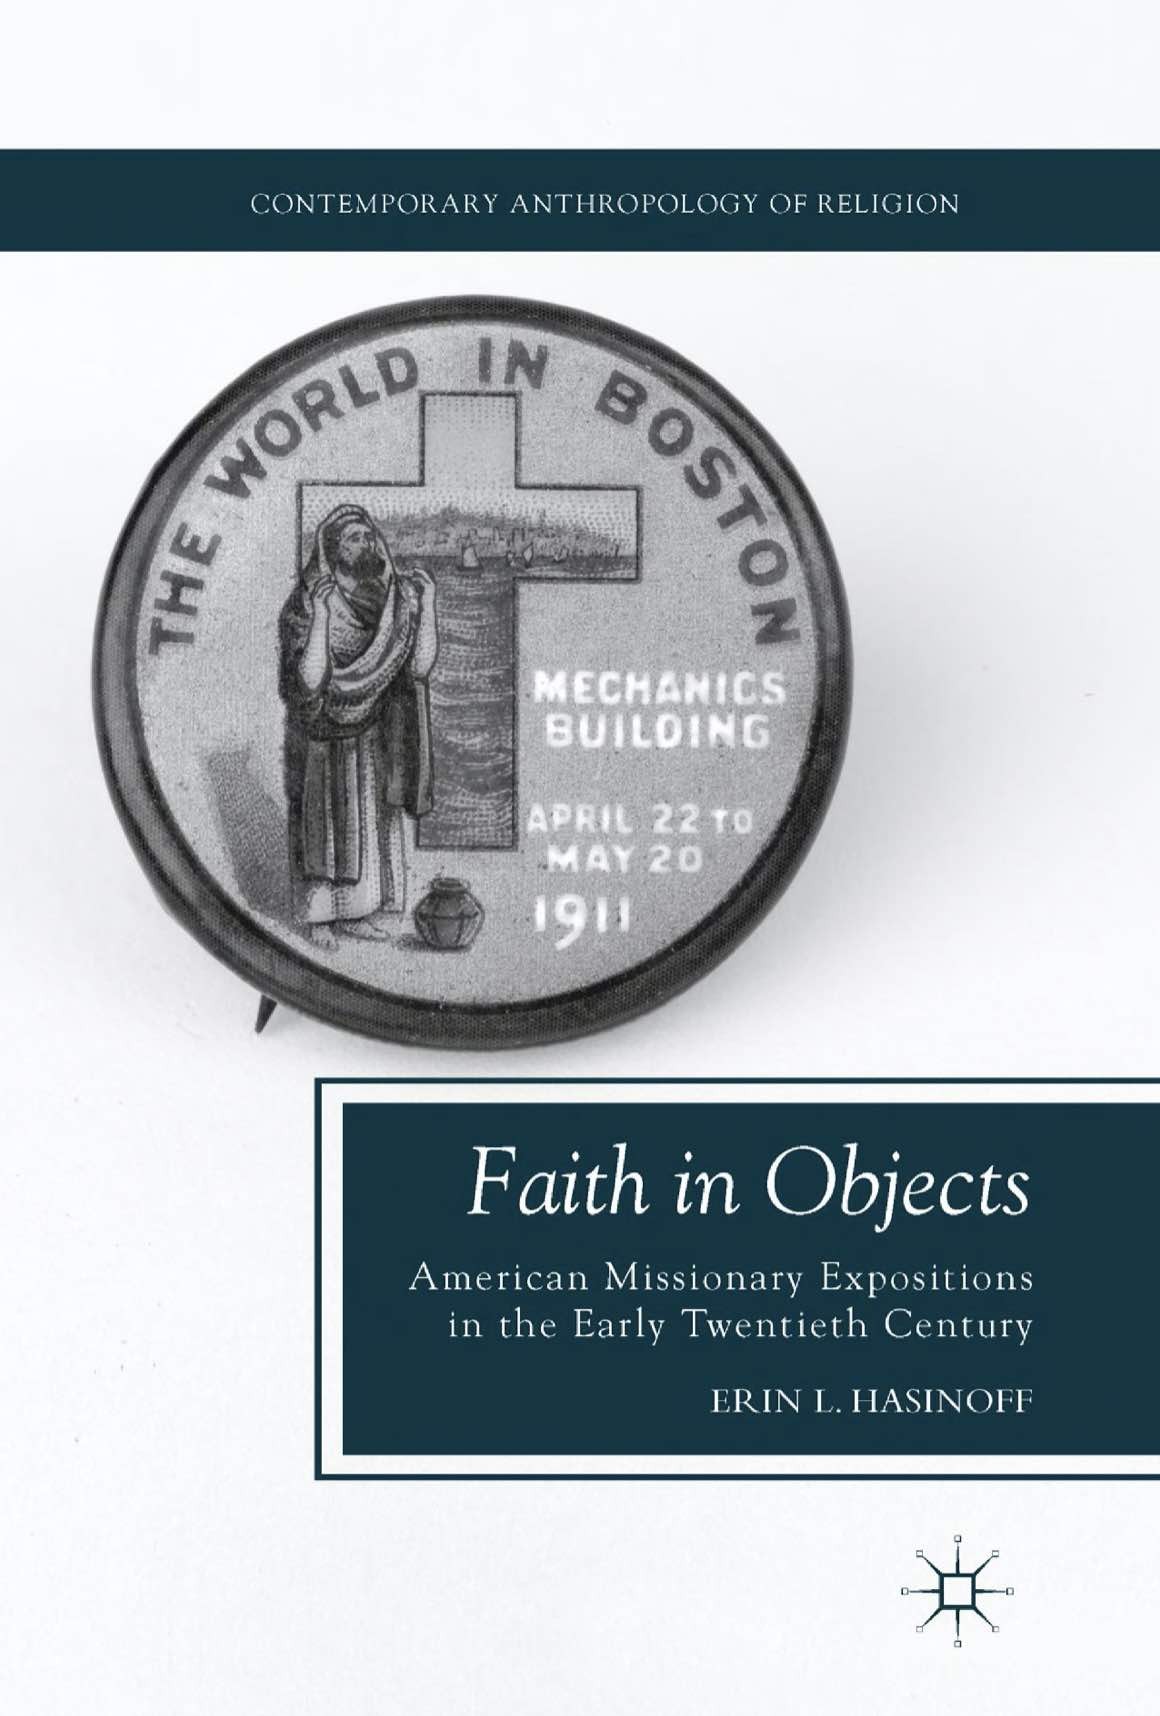 Book Cover: Erin Hasinoff, Faith in Objects: American Missionary Expositions in the Early Twentieth Century